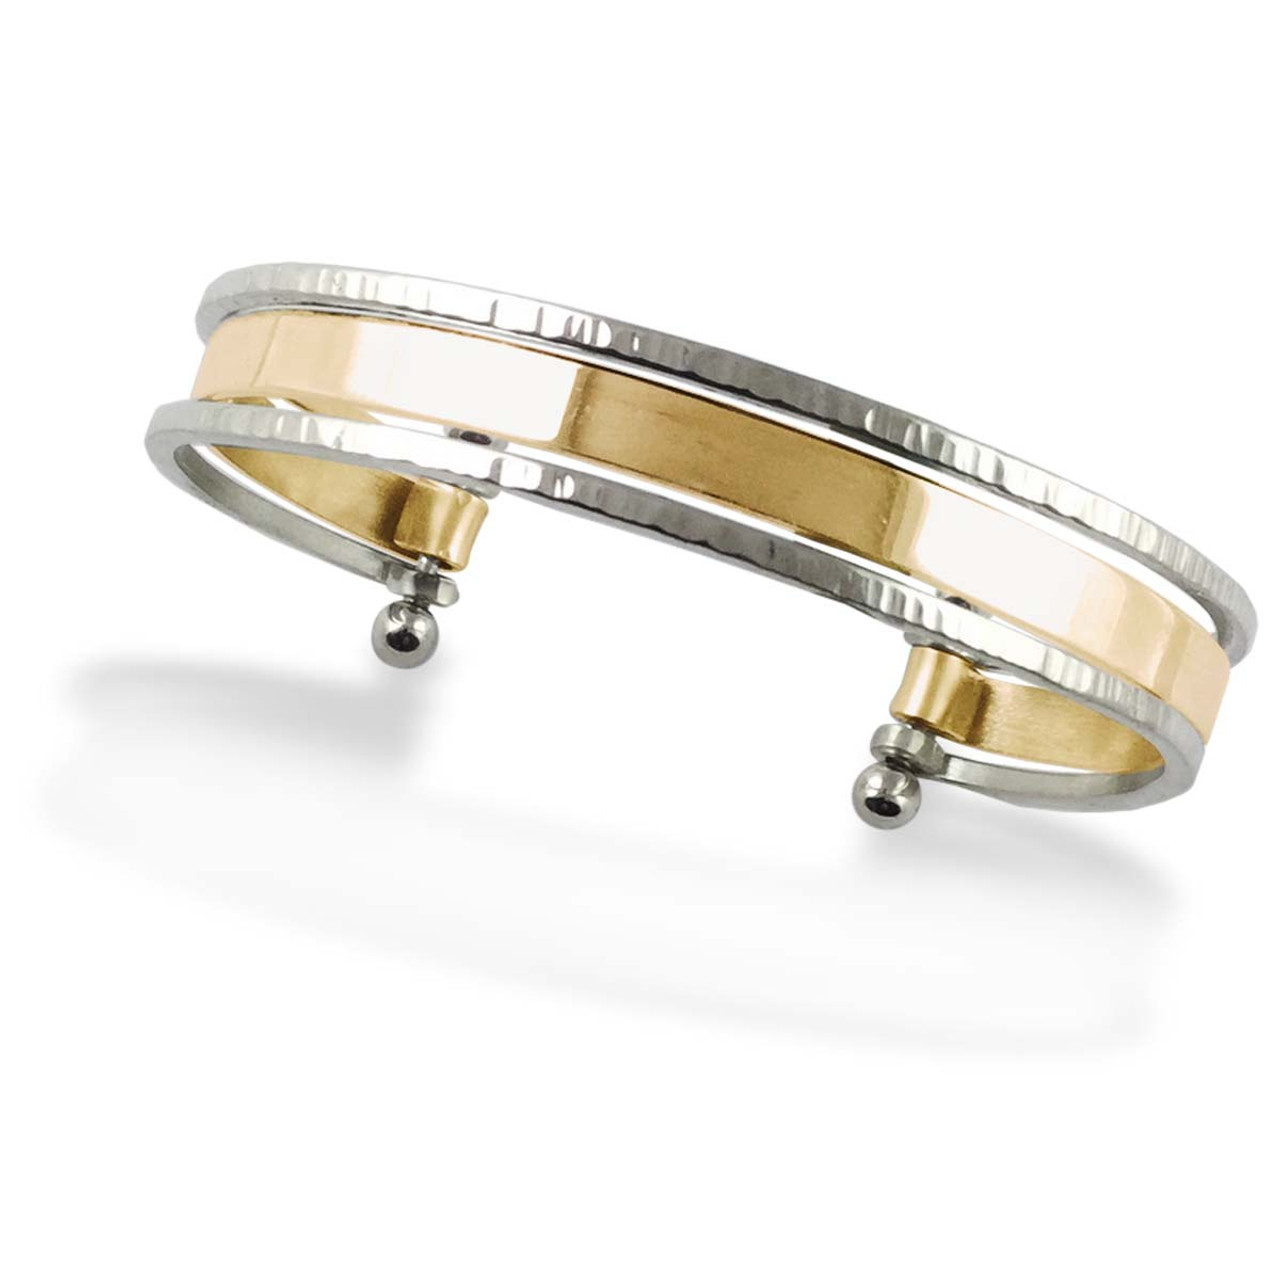 Frame Bracelet: Hammered Yellow Gold (with or without diamonds